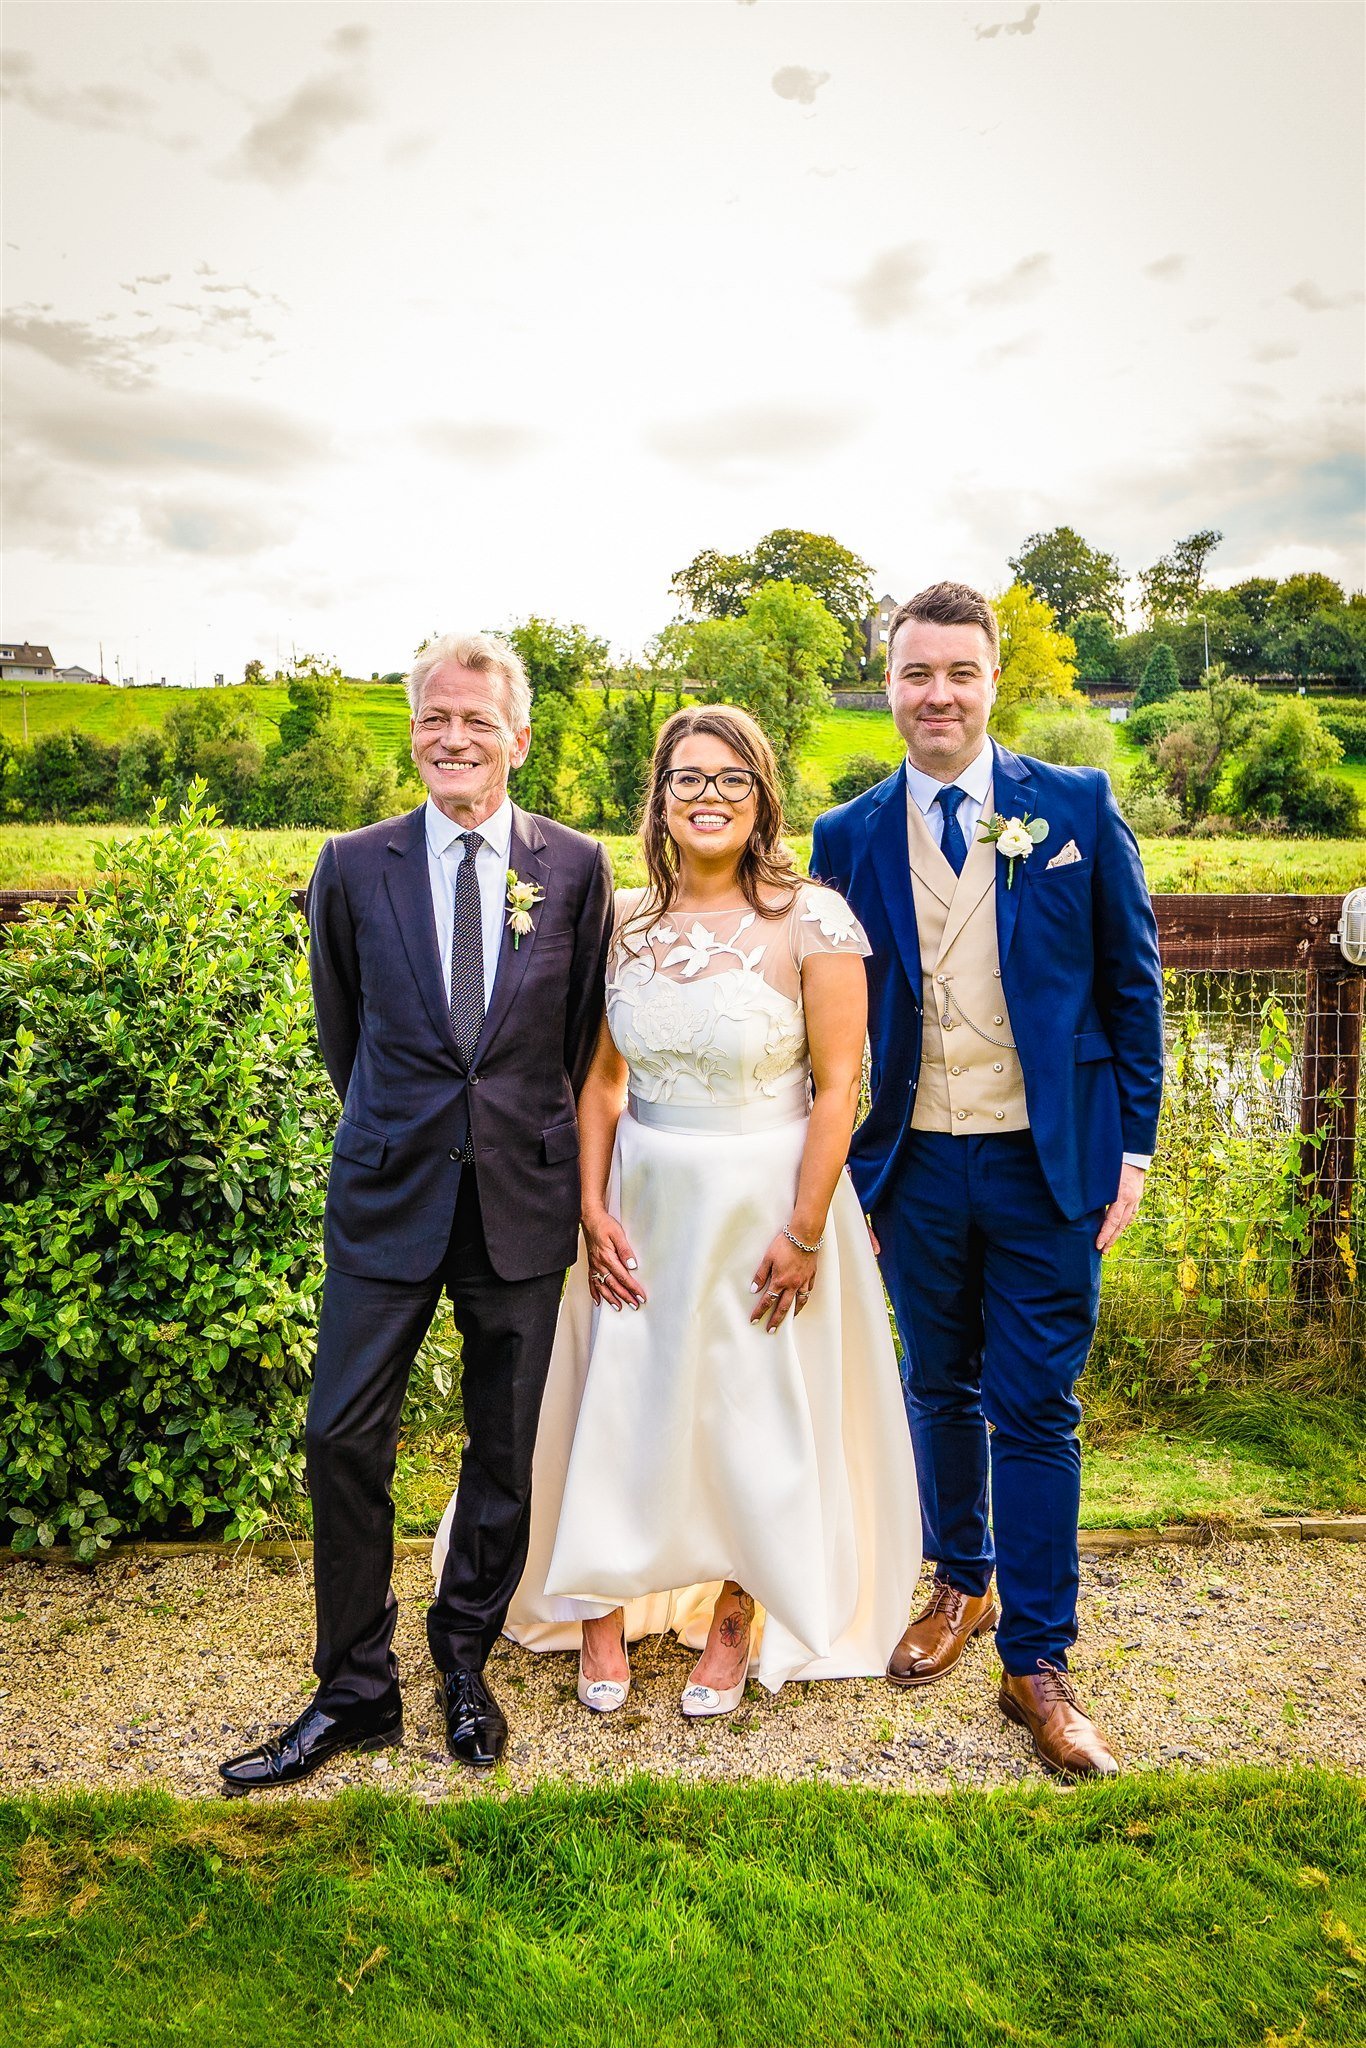 Beautiful bride Immy wears the Jackson dress and Blossom top by Halfpenny London